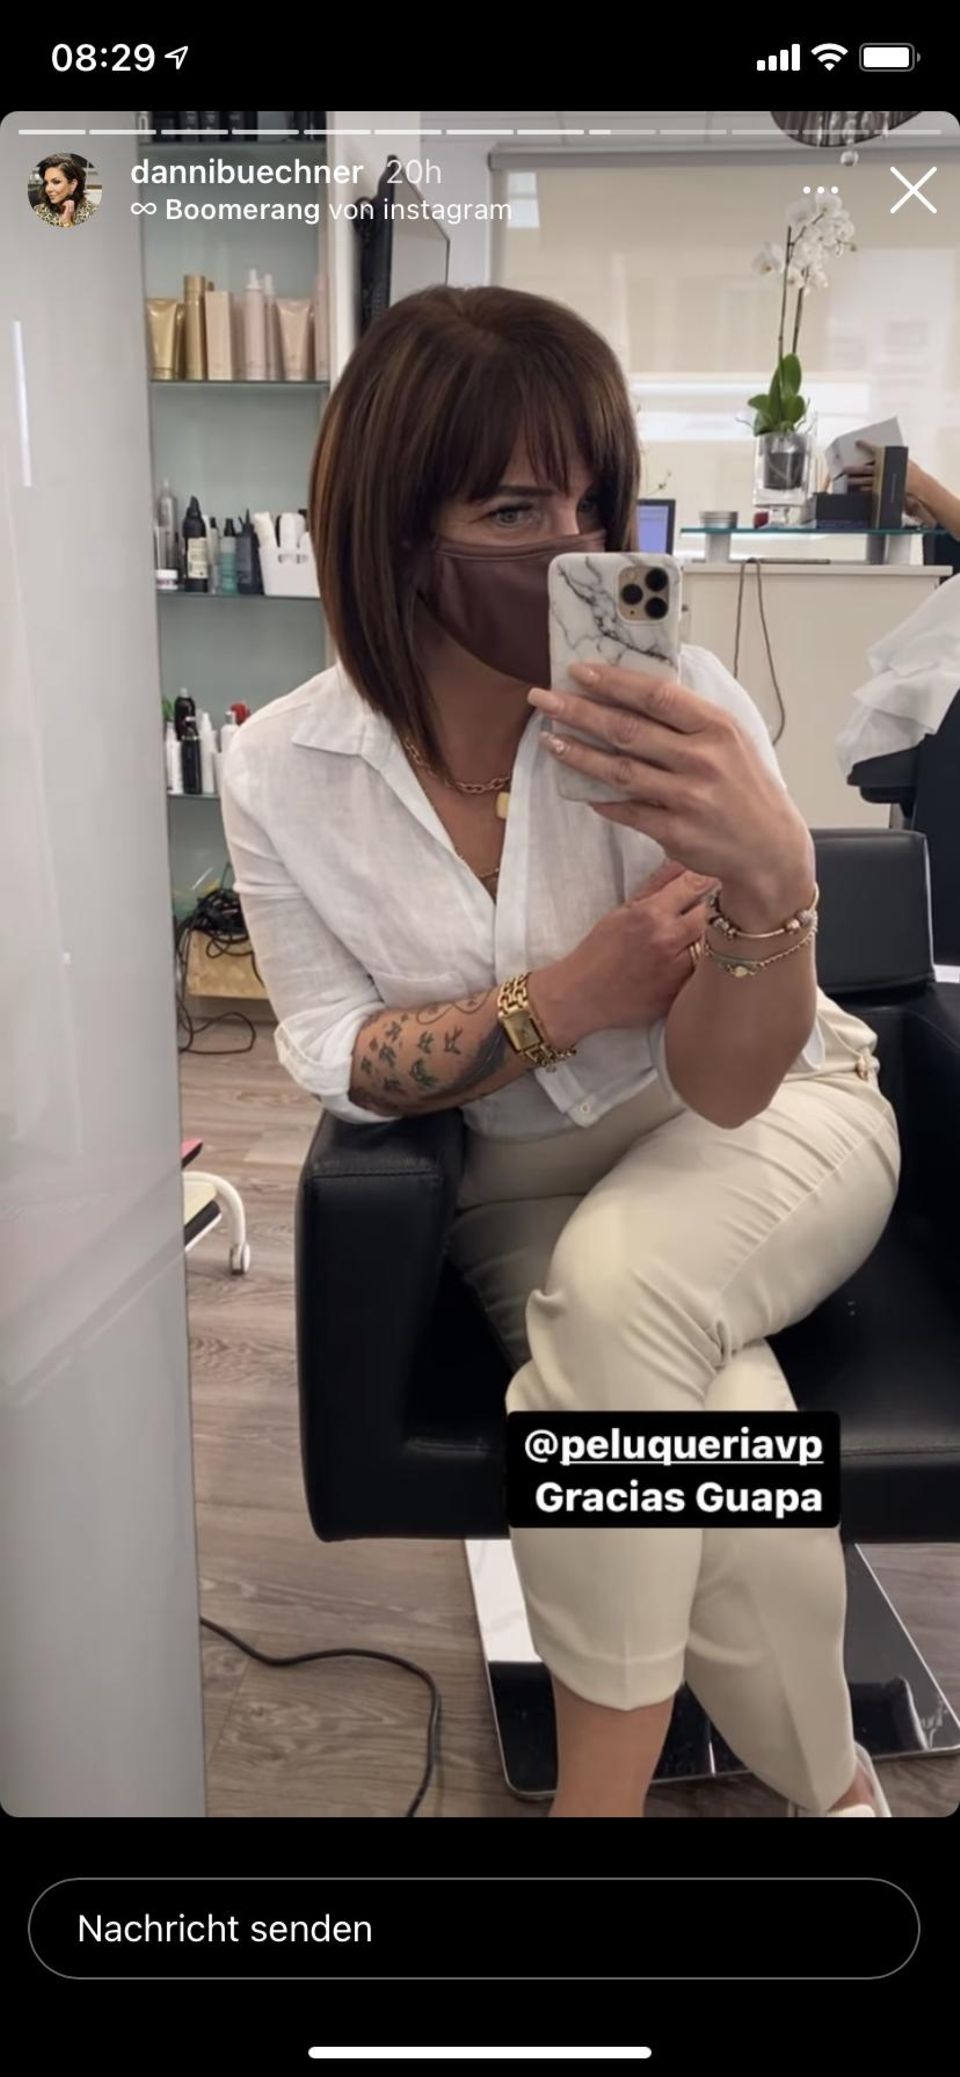 Danni Büchner posts a photo of her new hairstyle in her Instagram story.